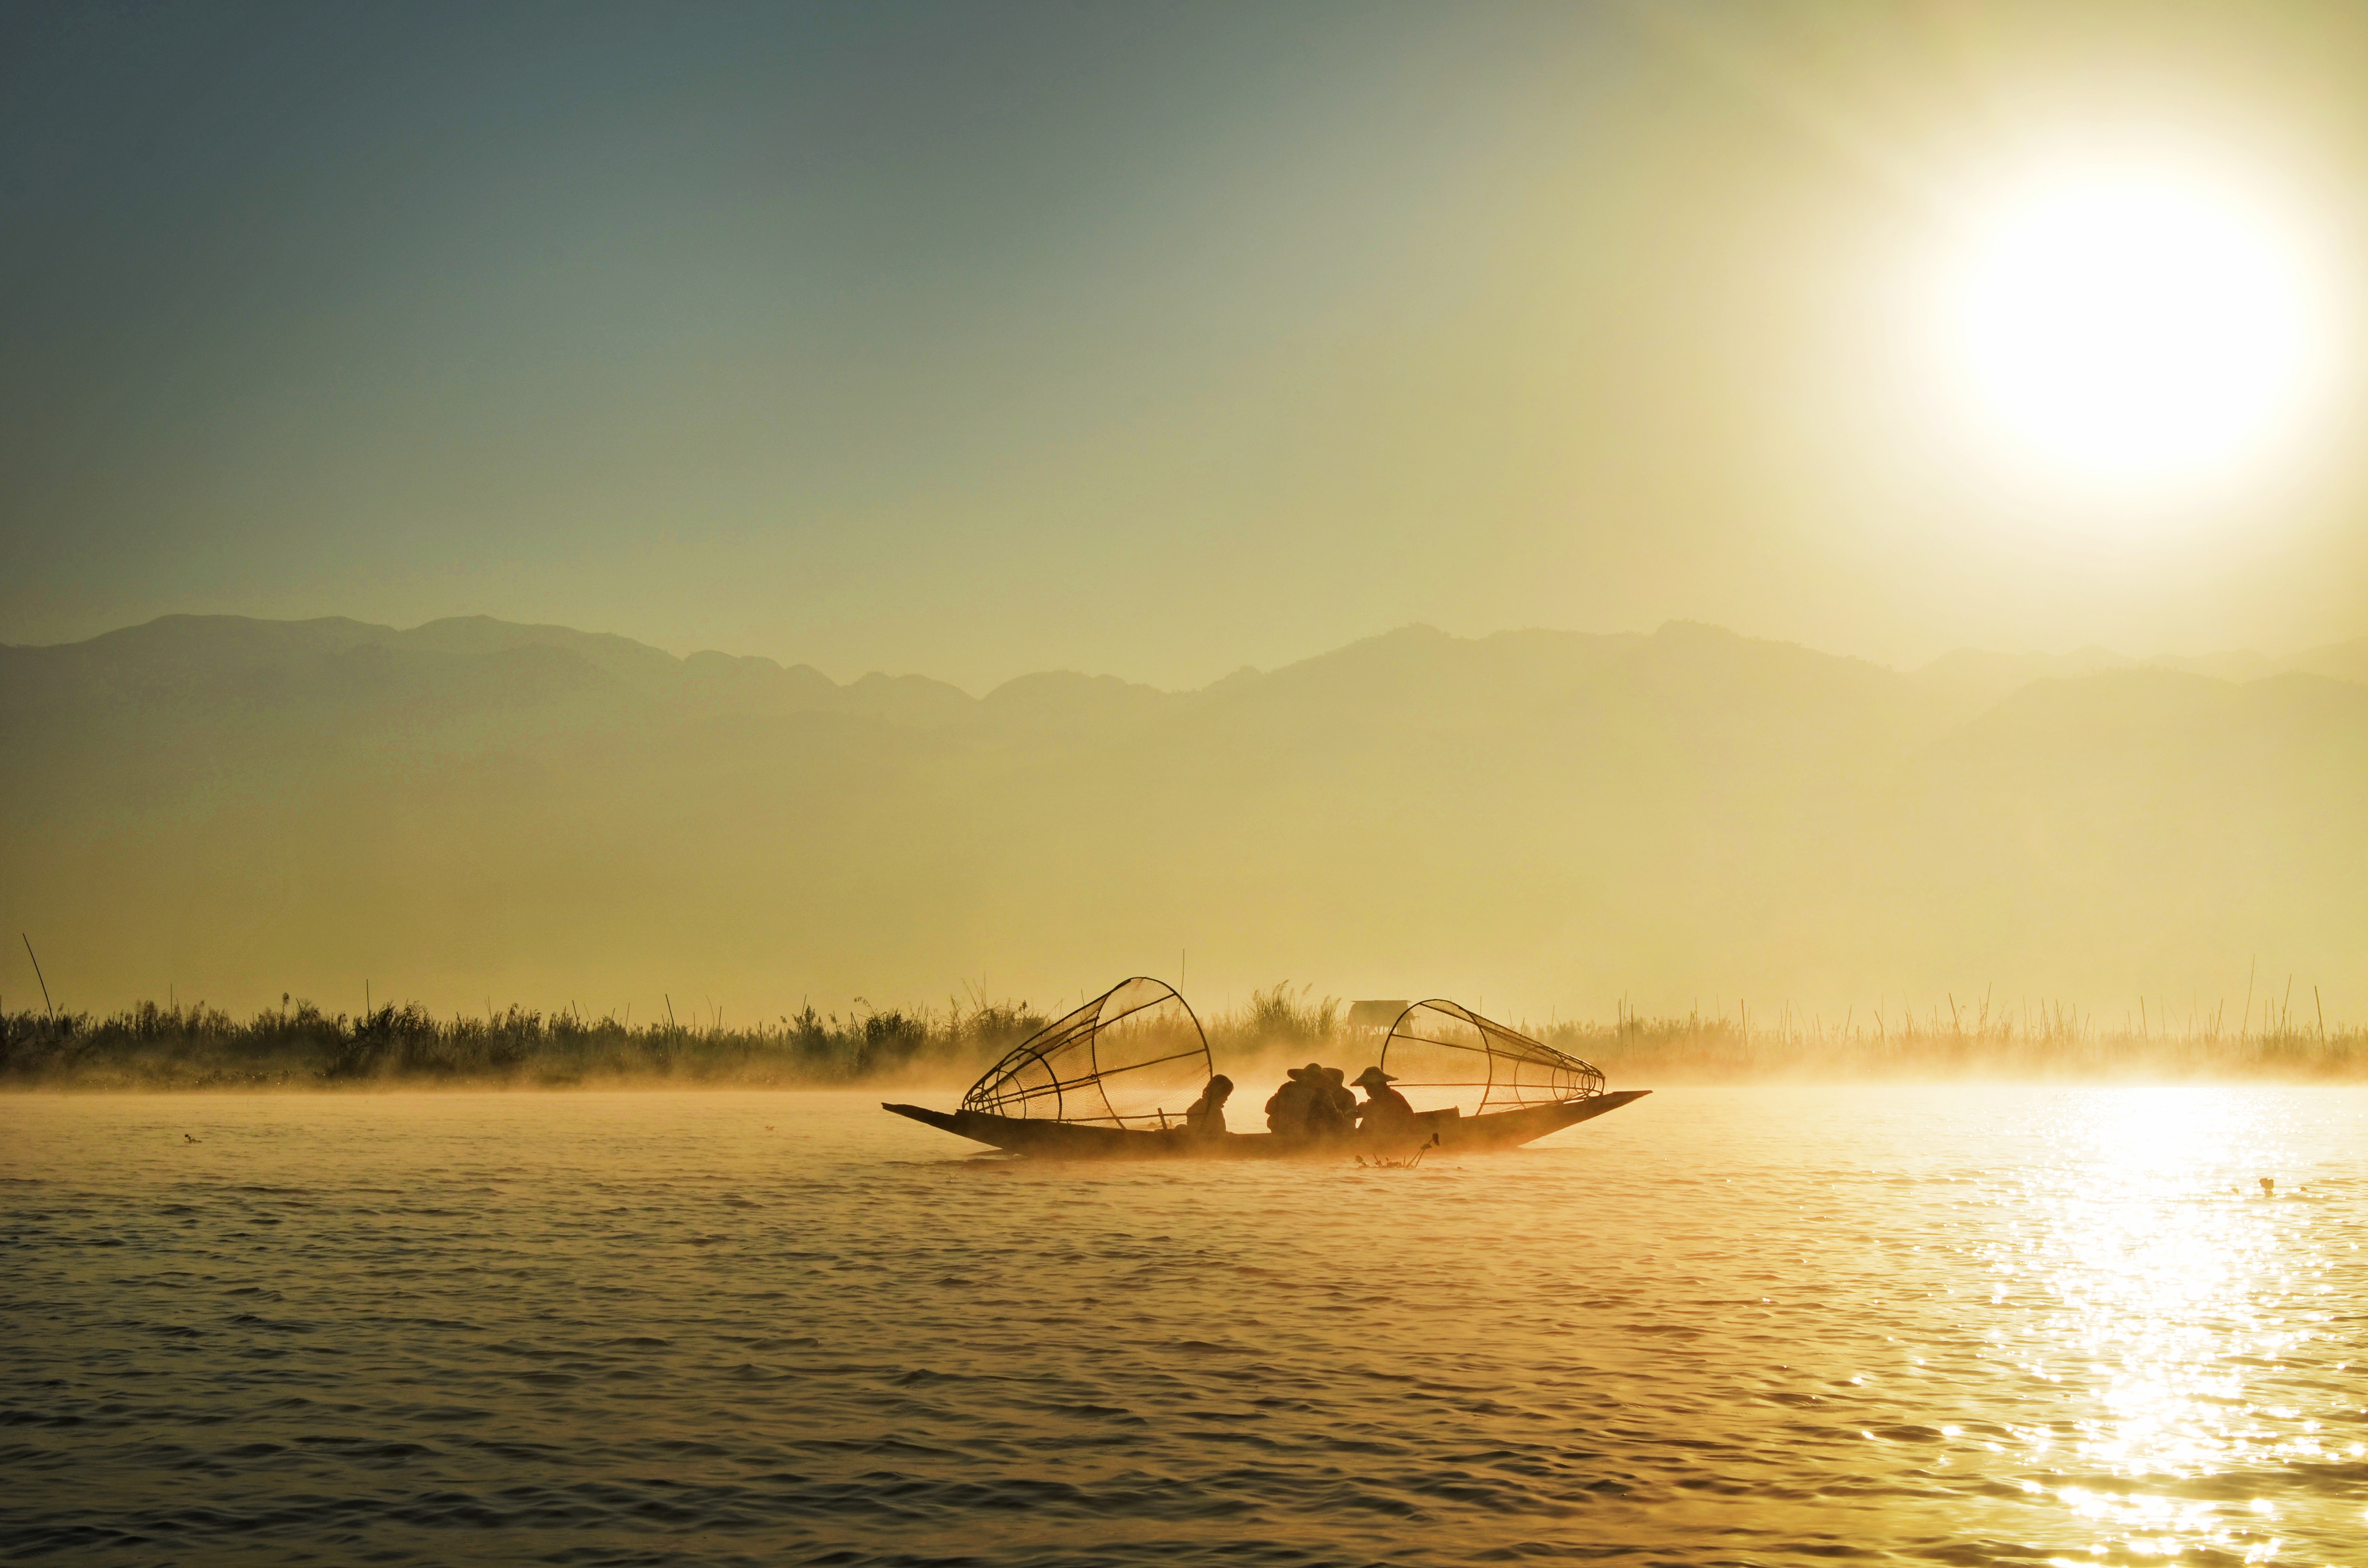 Group of people riding boat in the middle of water during sunrise photo